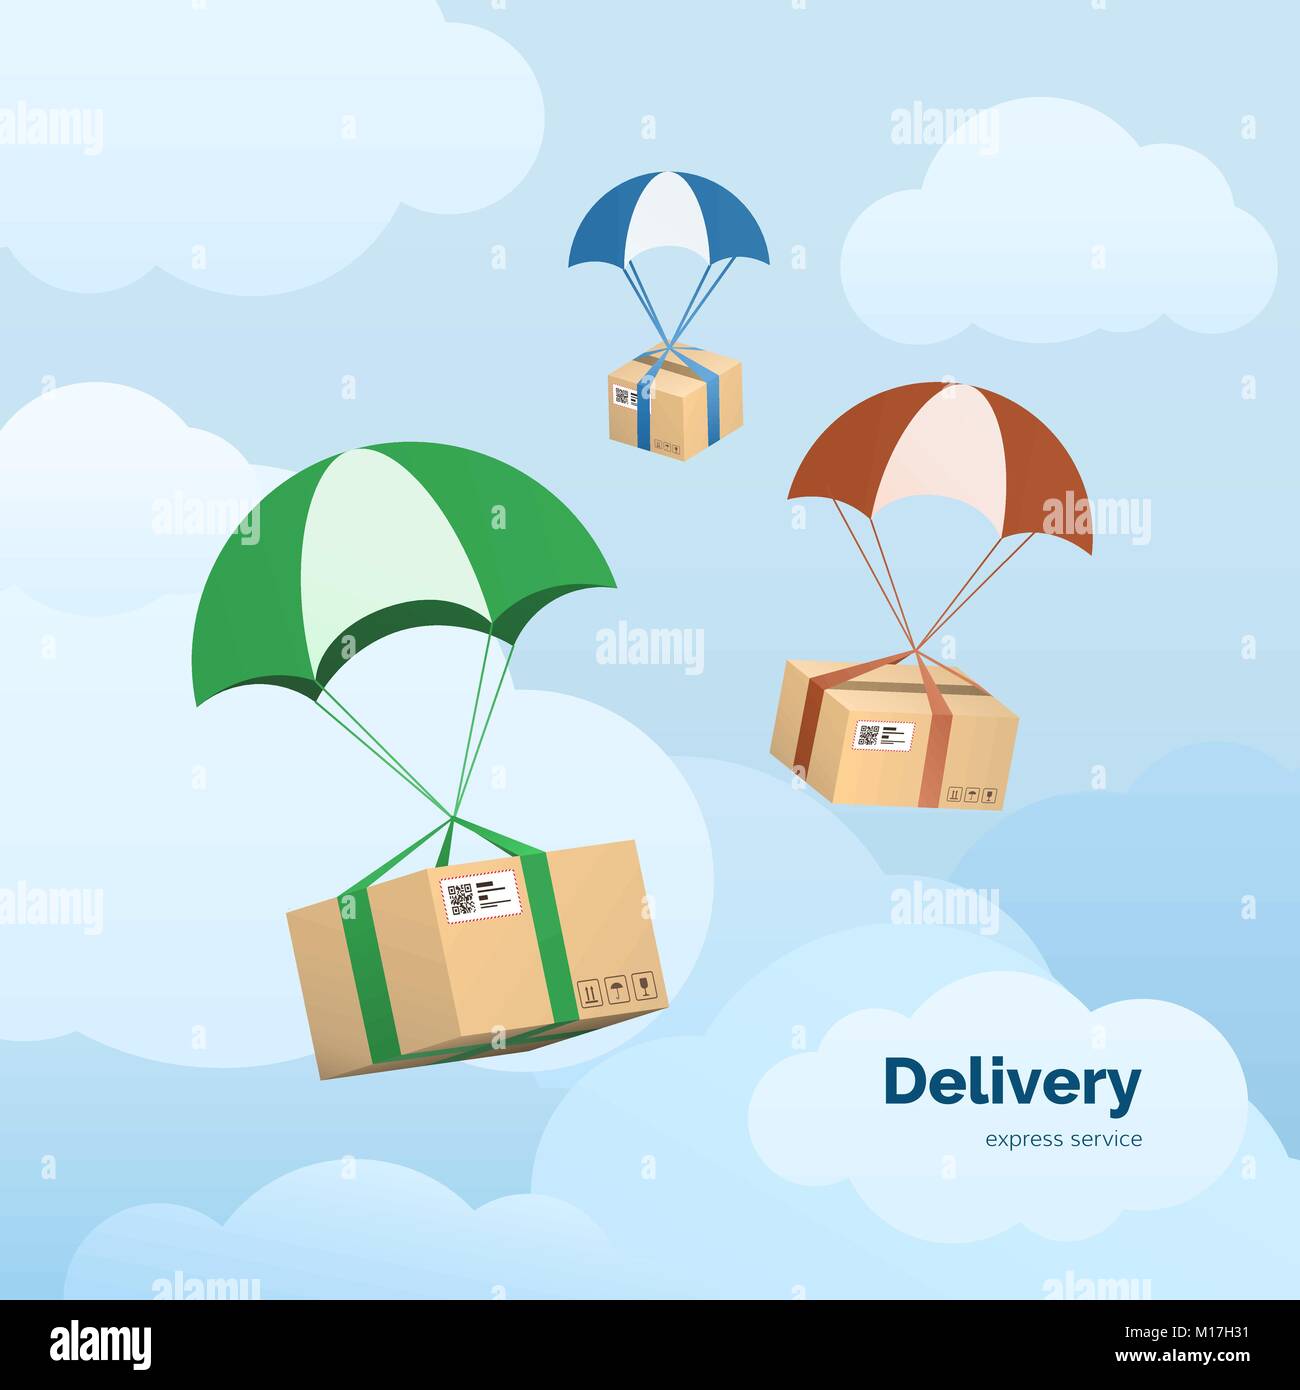 Delivery Services and Commerce. Packages flying on parachutes. Flat vector illustration elements isolated on sky background Stock Vector